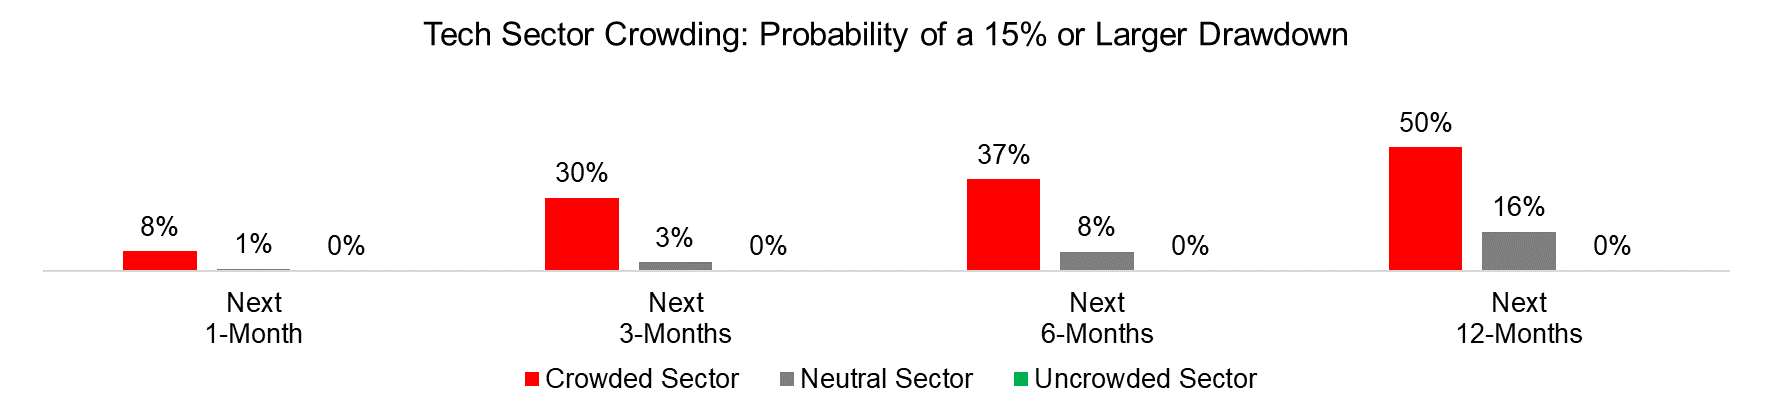 Tech Sector Crowding Probability of a 15% or Larger Drawdown